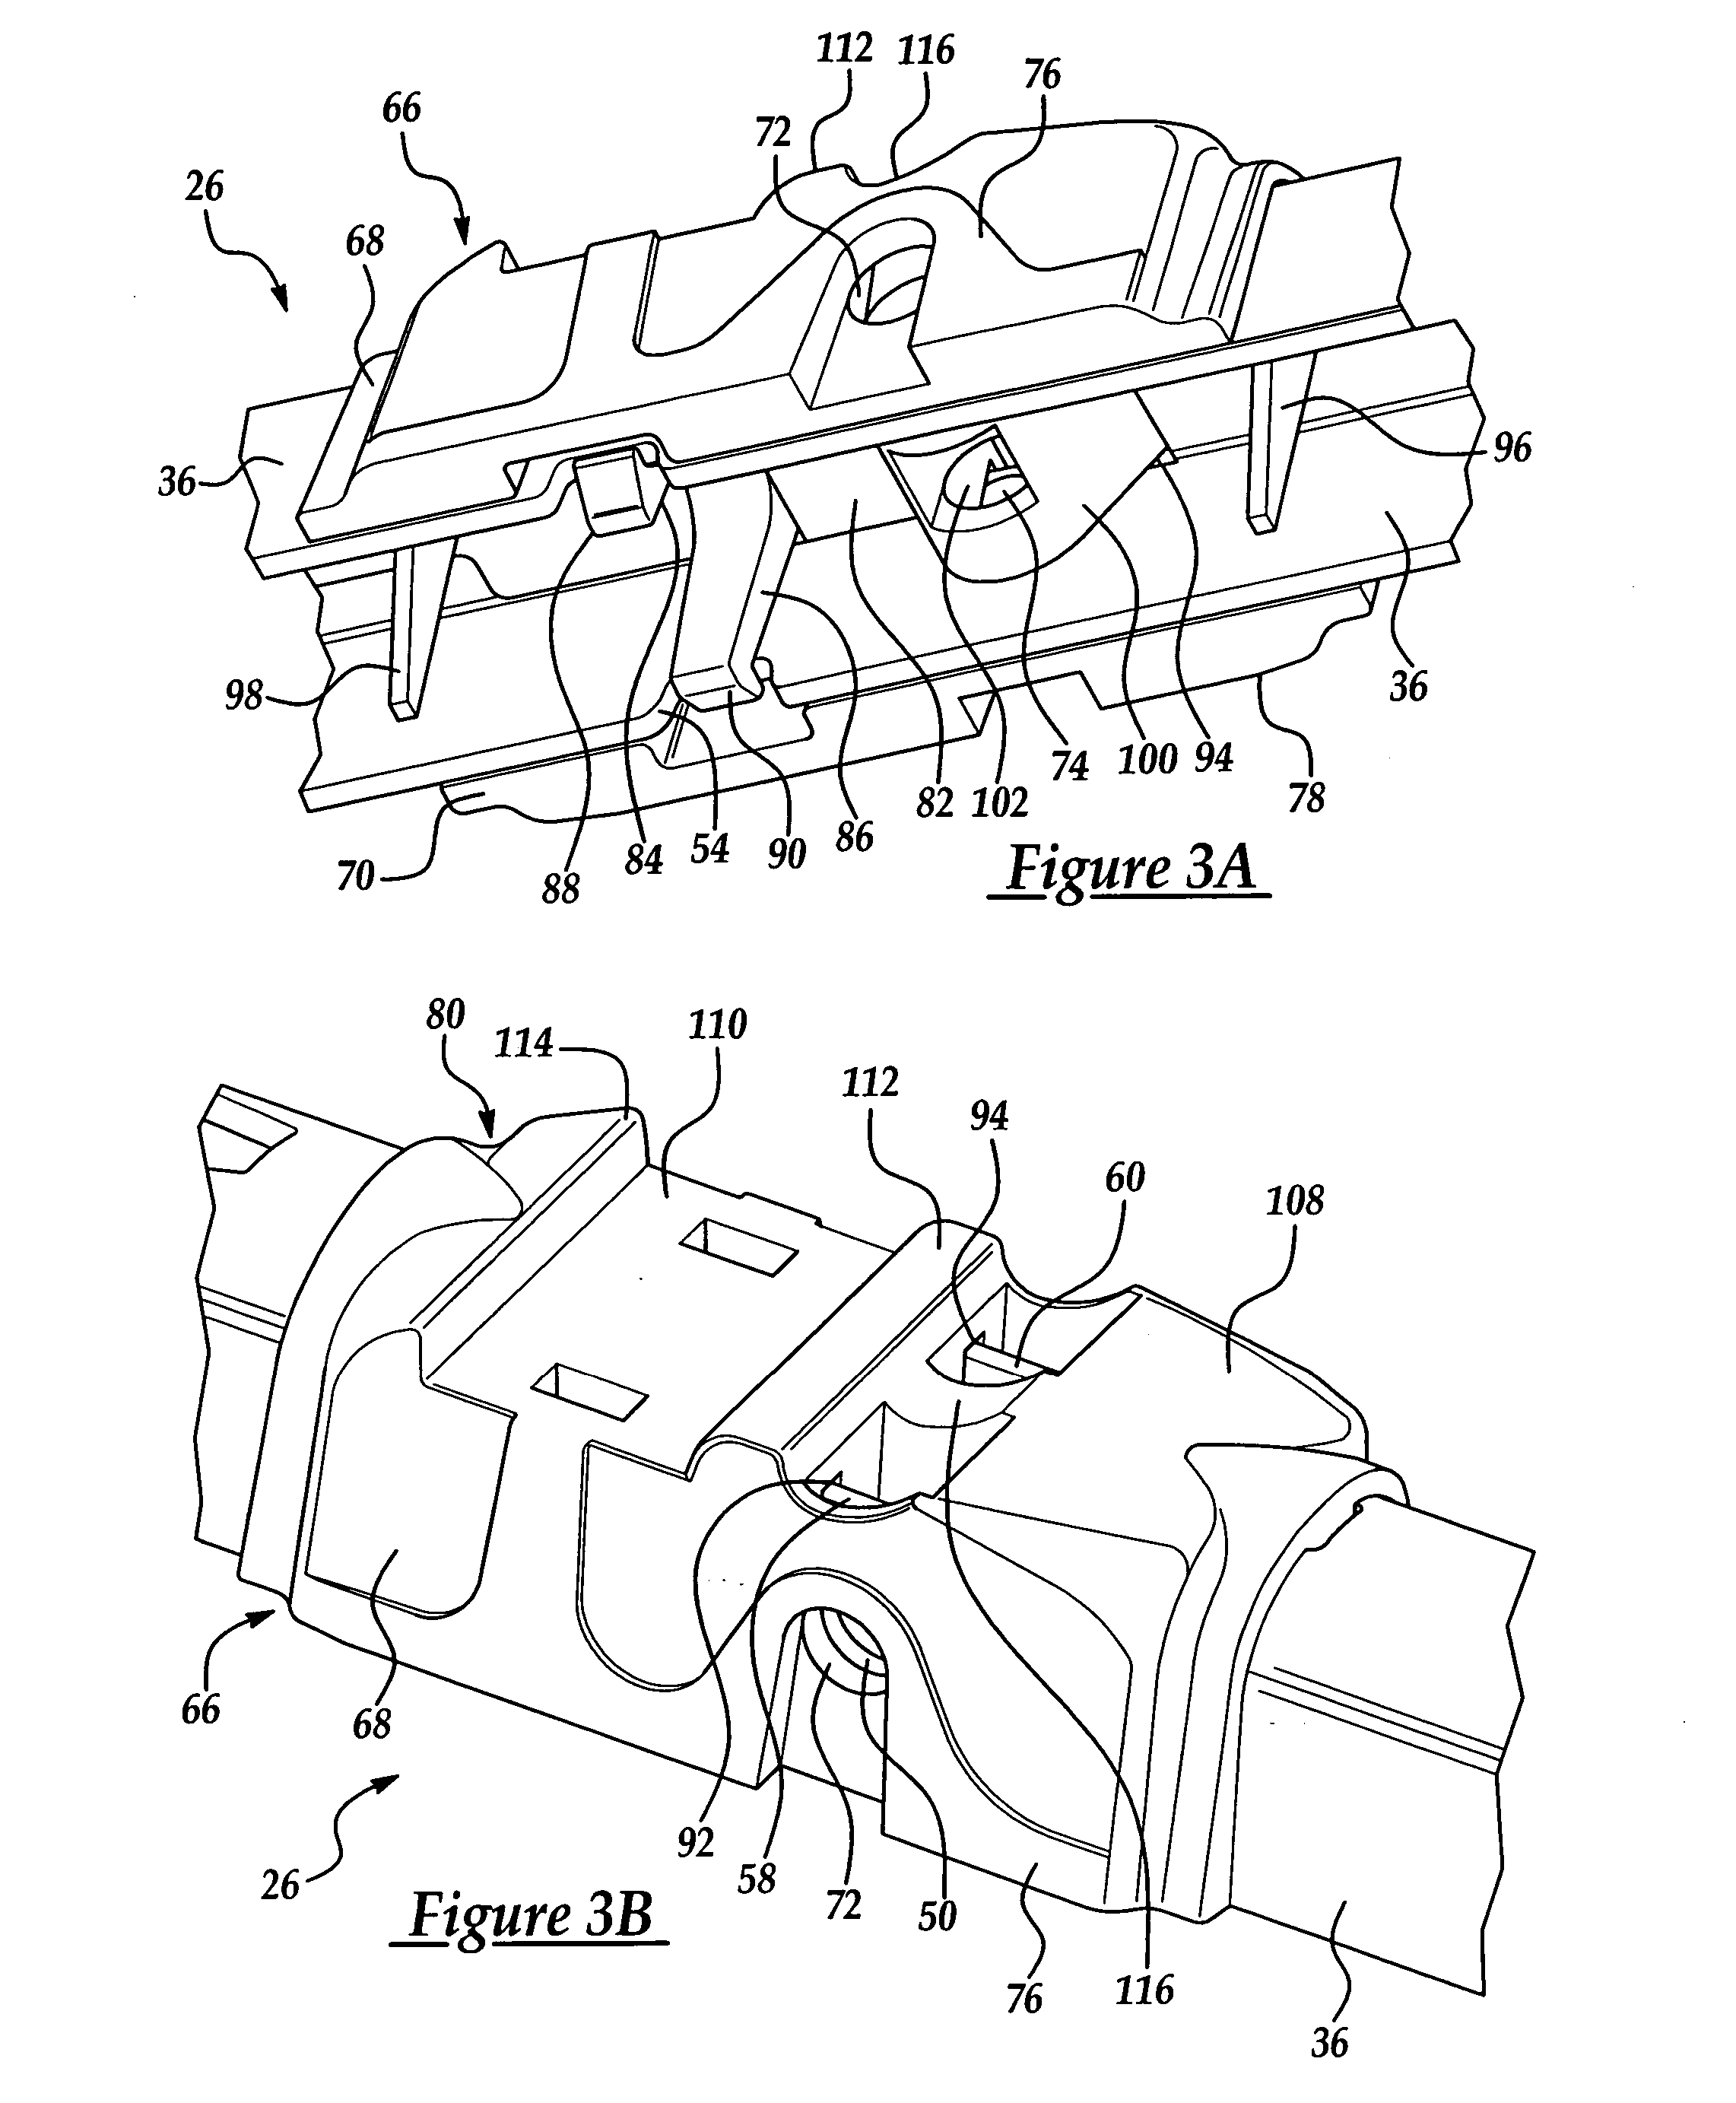 Wiper coupler and wiper assembly incorporating same